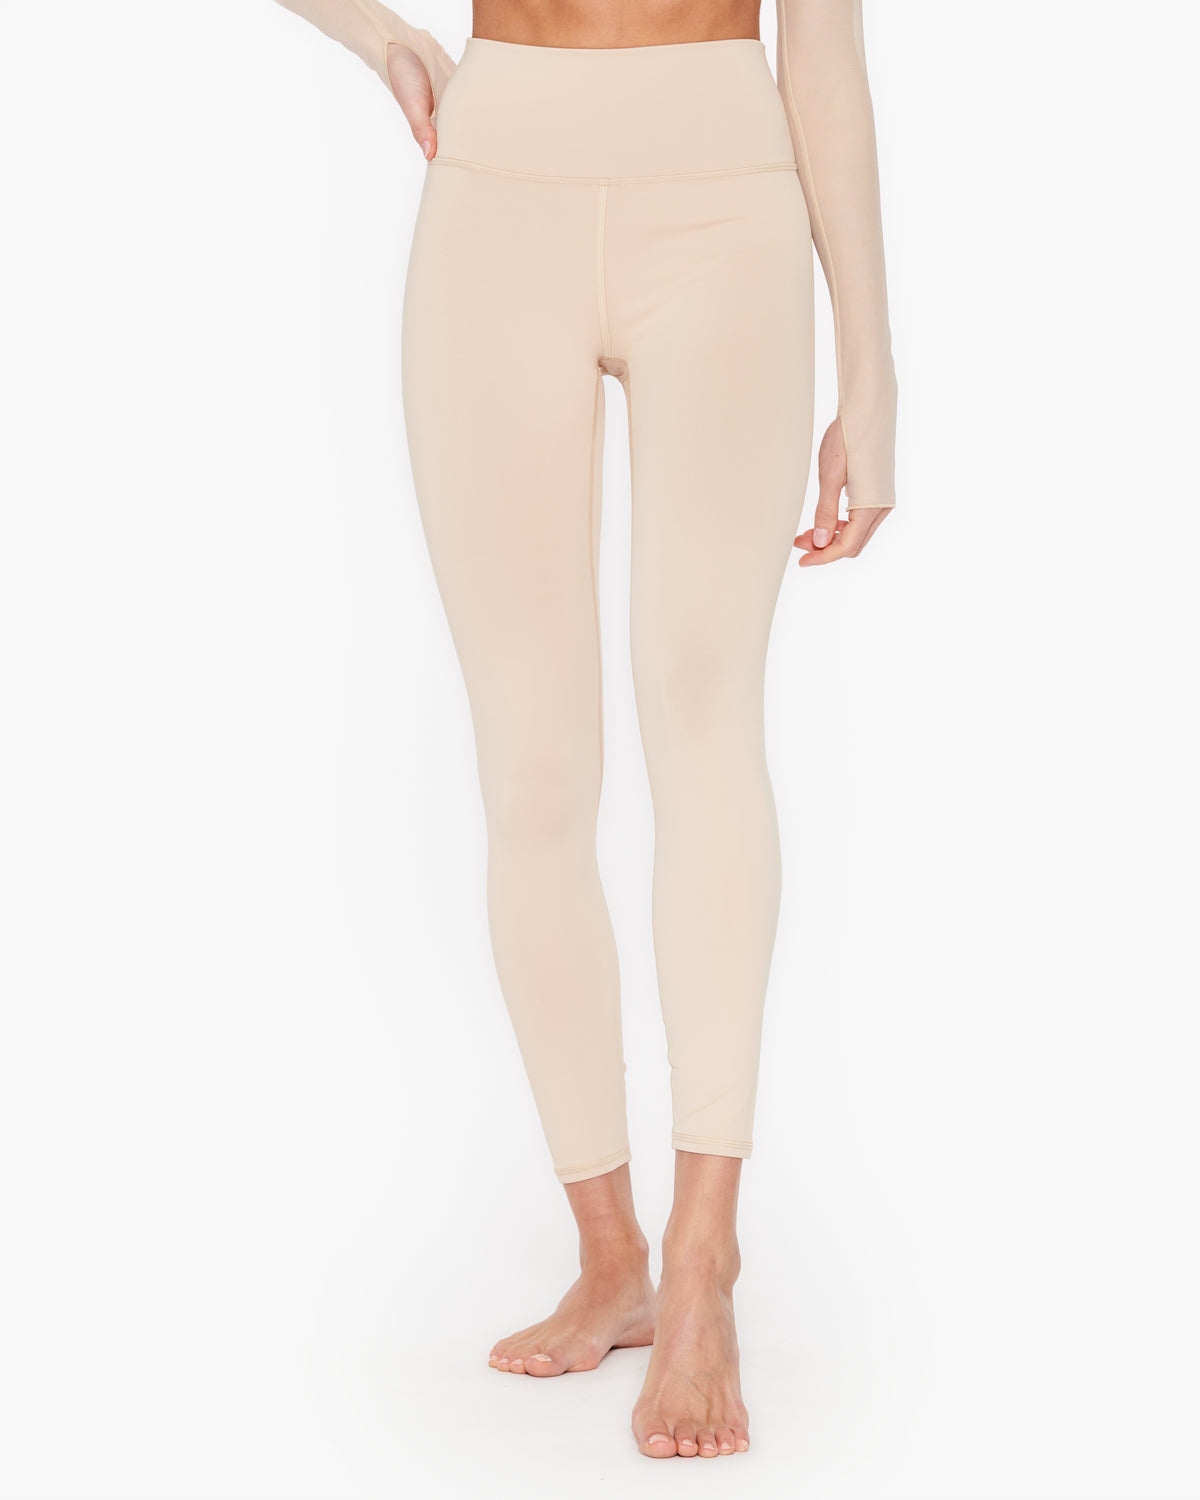 Airlift High-Waist 7/8 Corset Legging in Ivory by Alo Yoga